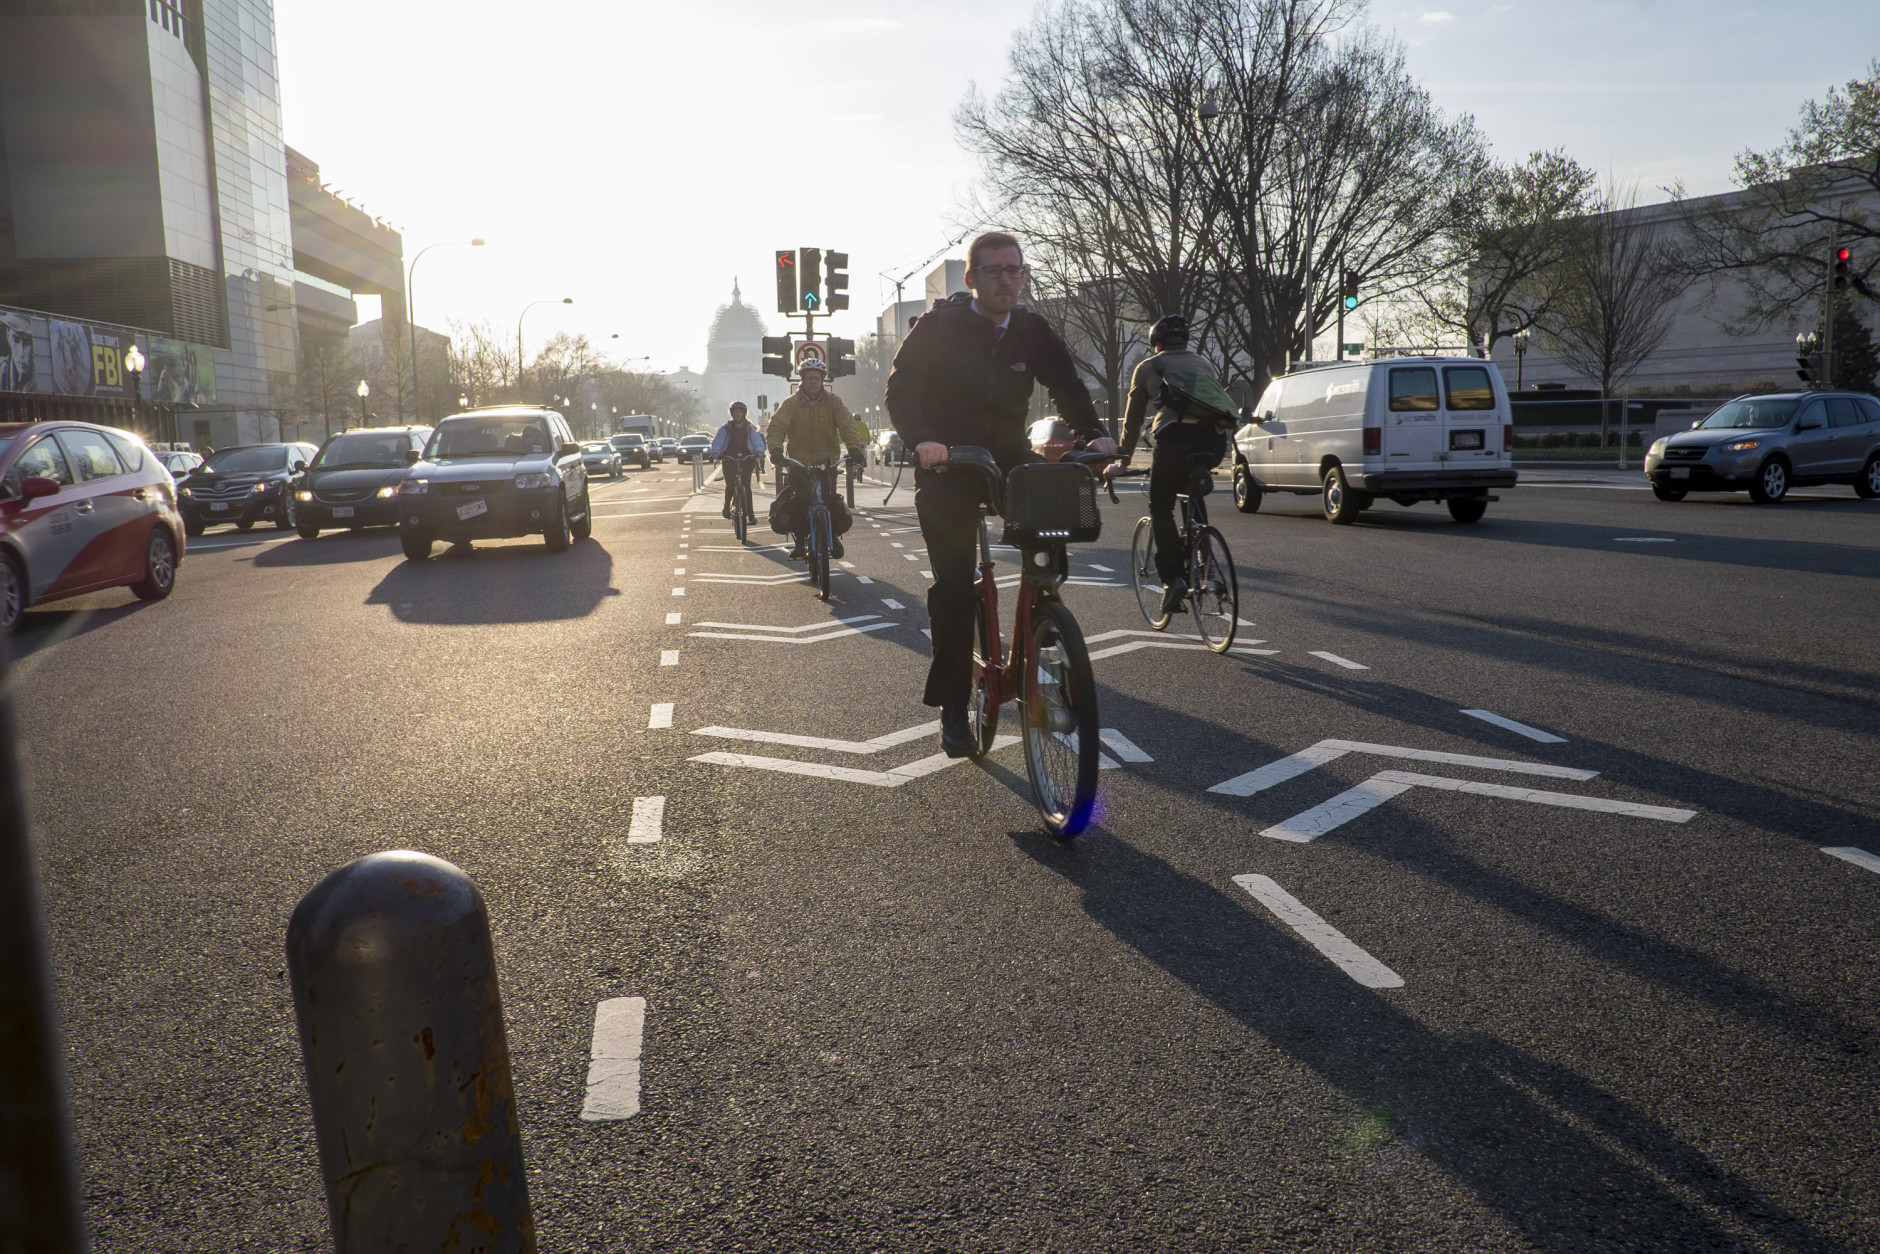 Commuters take advantage of bike paths in the city amid the Metorail shutdown. (Photo by Pete Marovich/Getty Images)